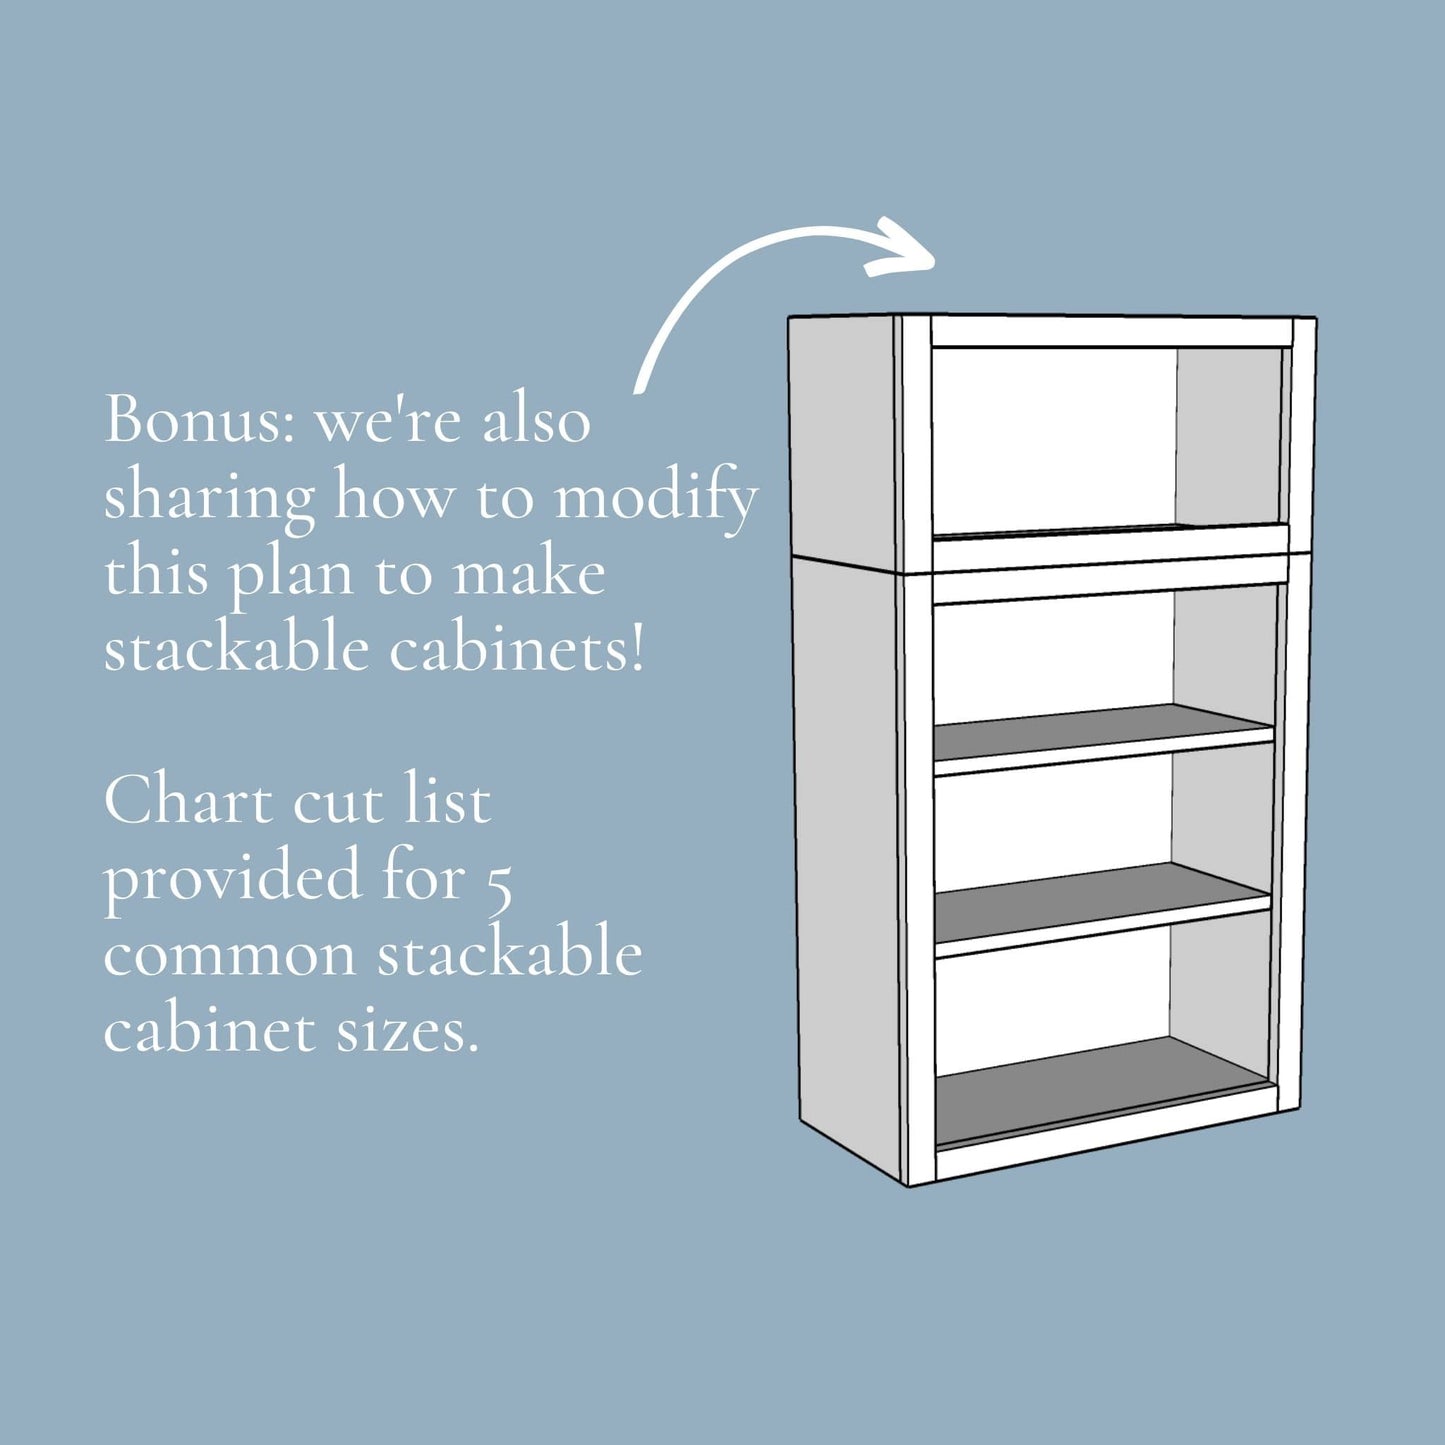 Upper Cabinet with Face Frame Printable Plans